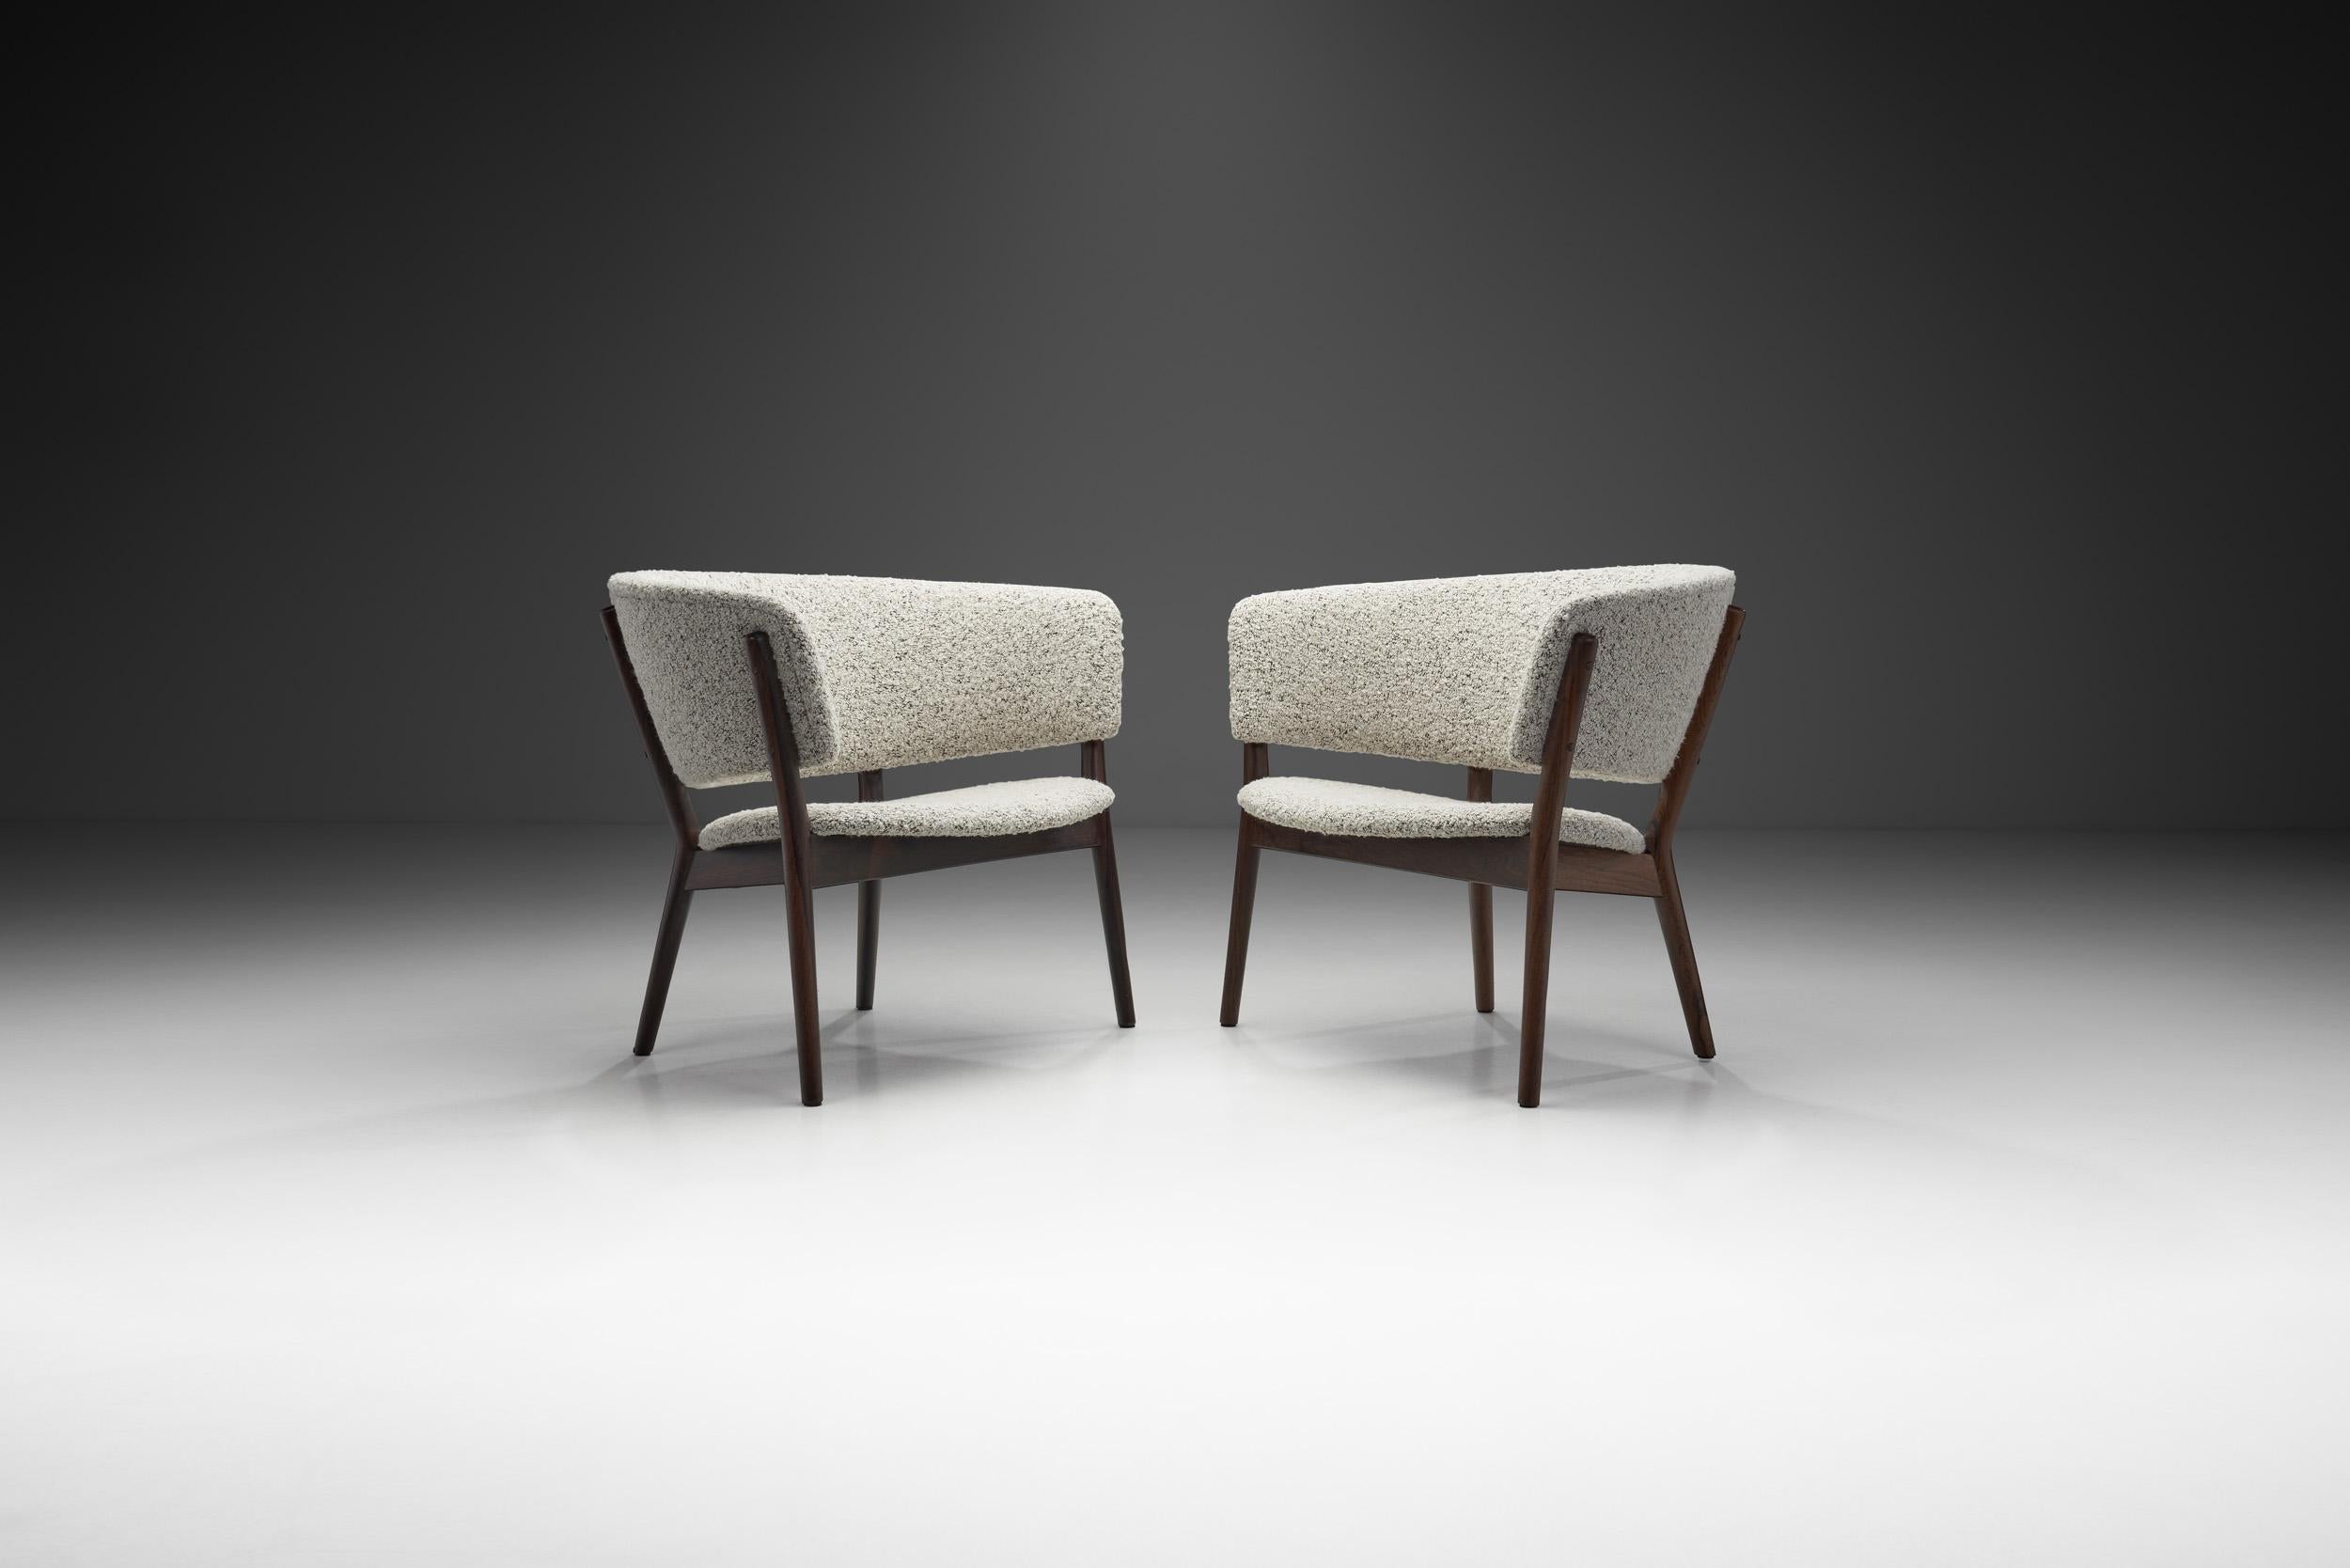 This pair of armchairs is what we consider a timeless Danish Modern classic. The “ND83” was designed in 1952 by Nanna Ditzel for the exhibition 'Today’s Furniture, Home Equipment' in the Forum Hall Copenhagen in 1952.

Chairs are often considered